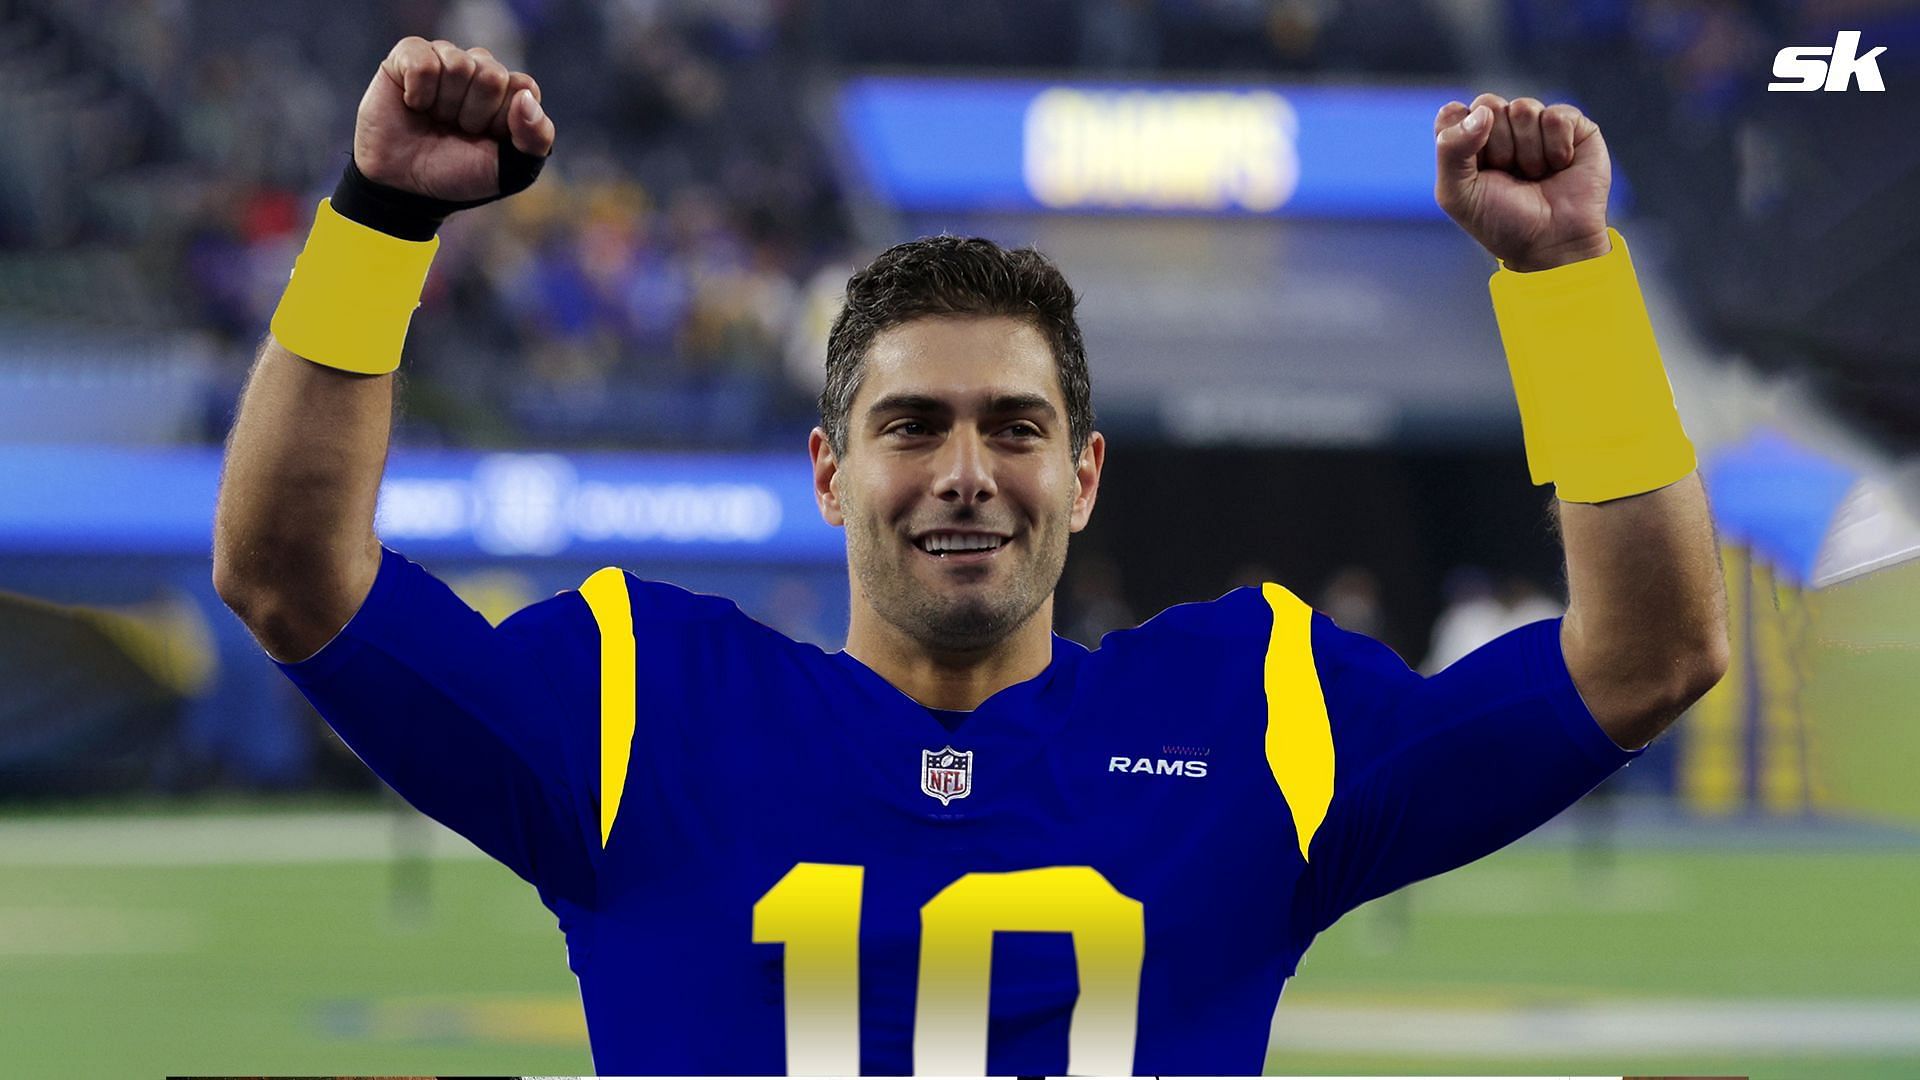 Rams reportedly looked to sign Jimmy Garoppolo, potentially tampered as well